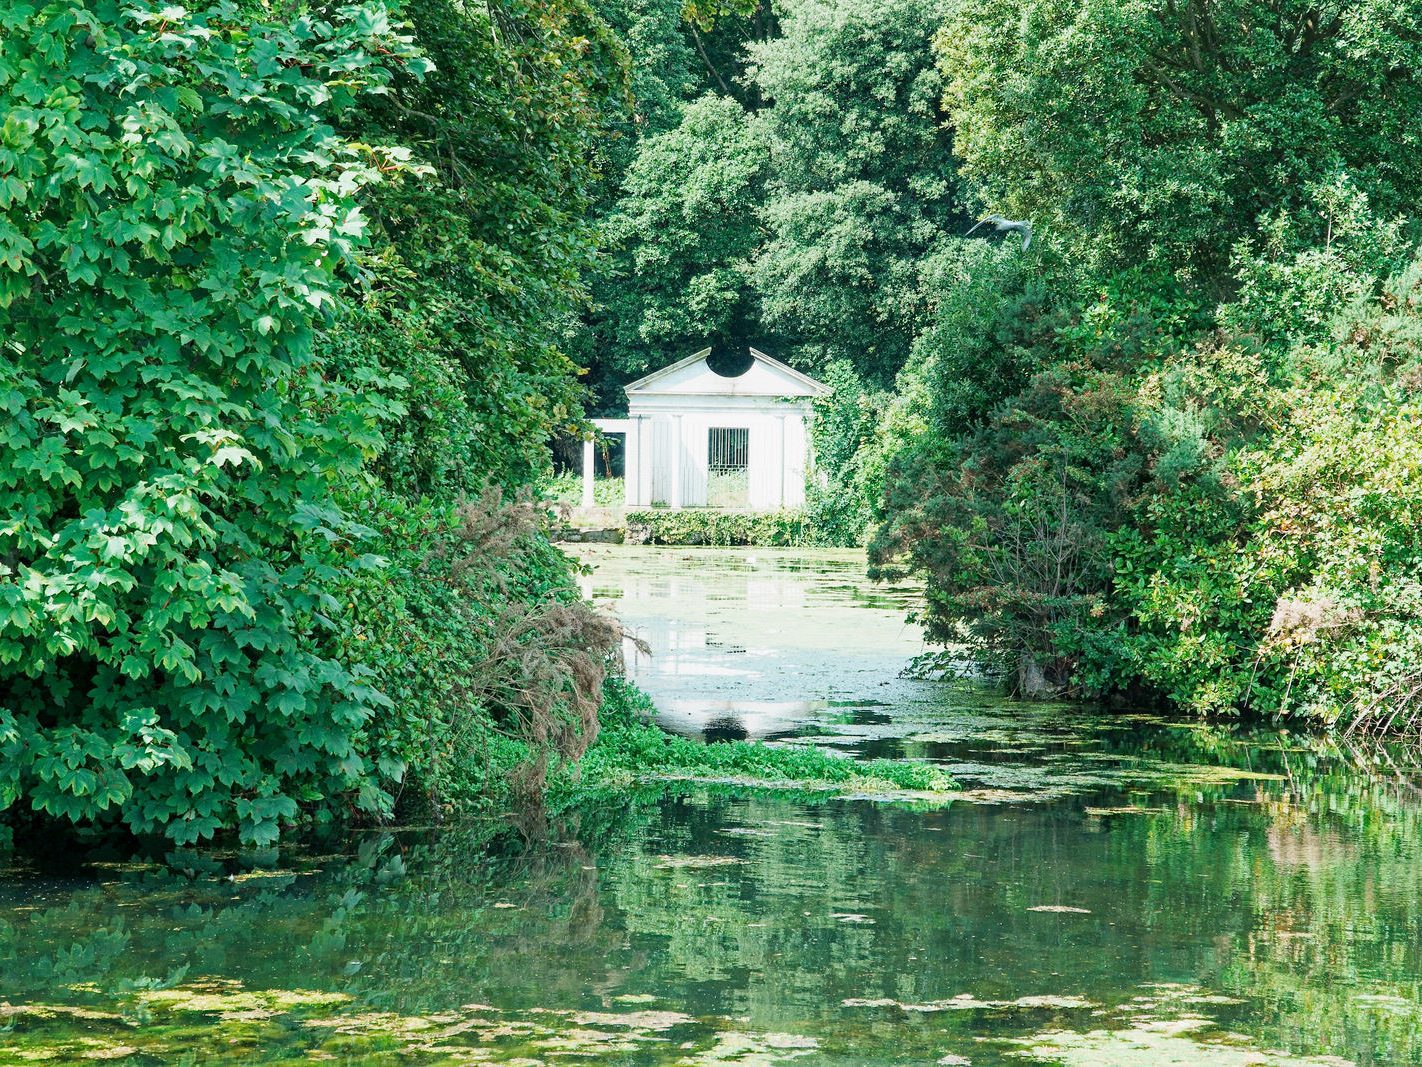 TEMPLE AND POND AT ST ANNE'S PARK IN RAHENY [ALSO KNOWN AS THE BOATHOUSE] 014